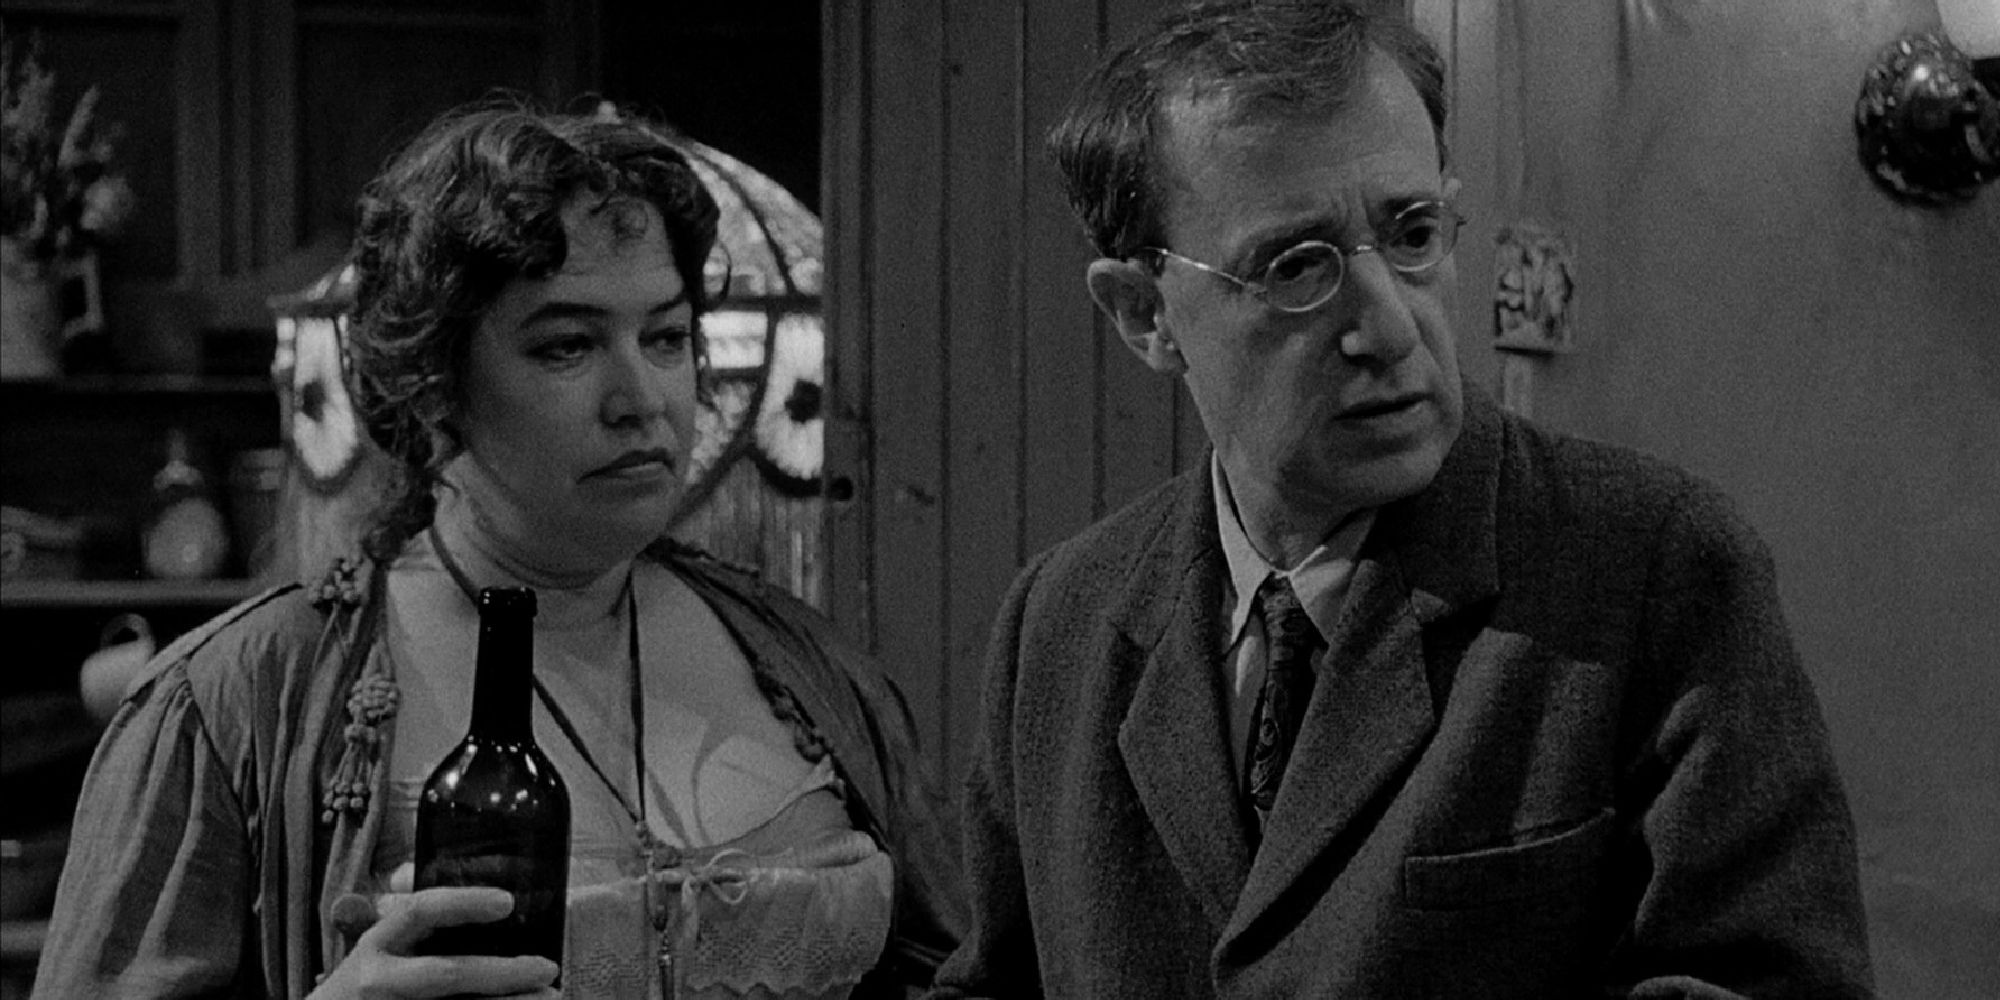 Kathy Bates and Woody Allen in hadows and Fog